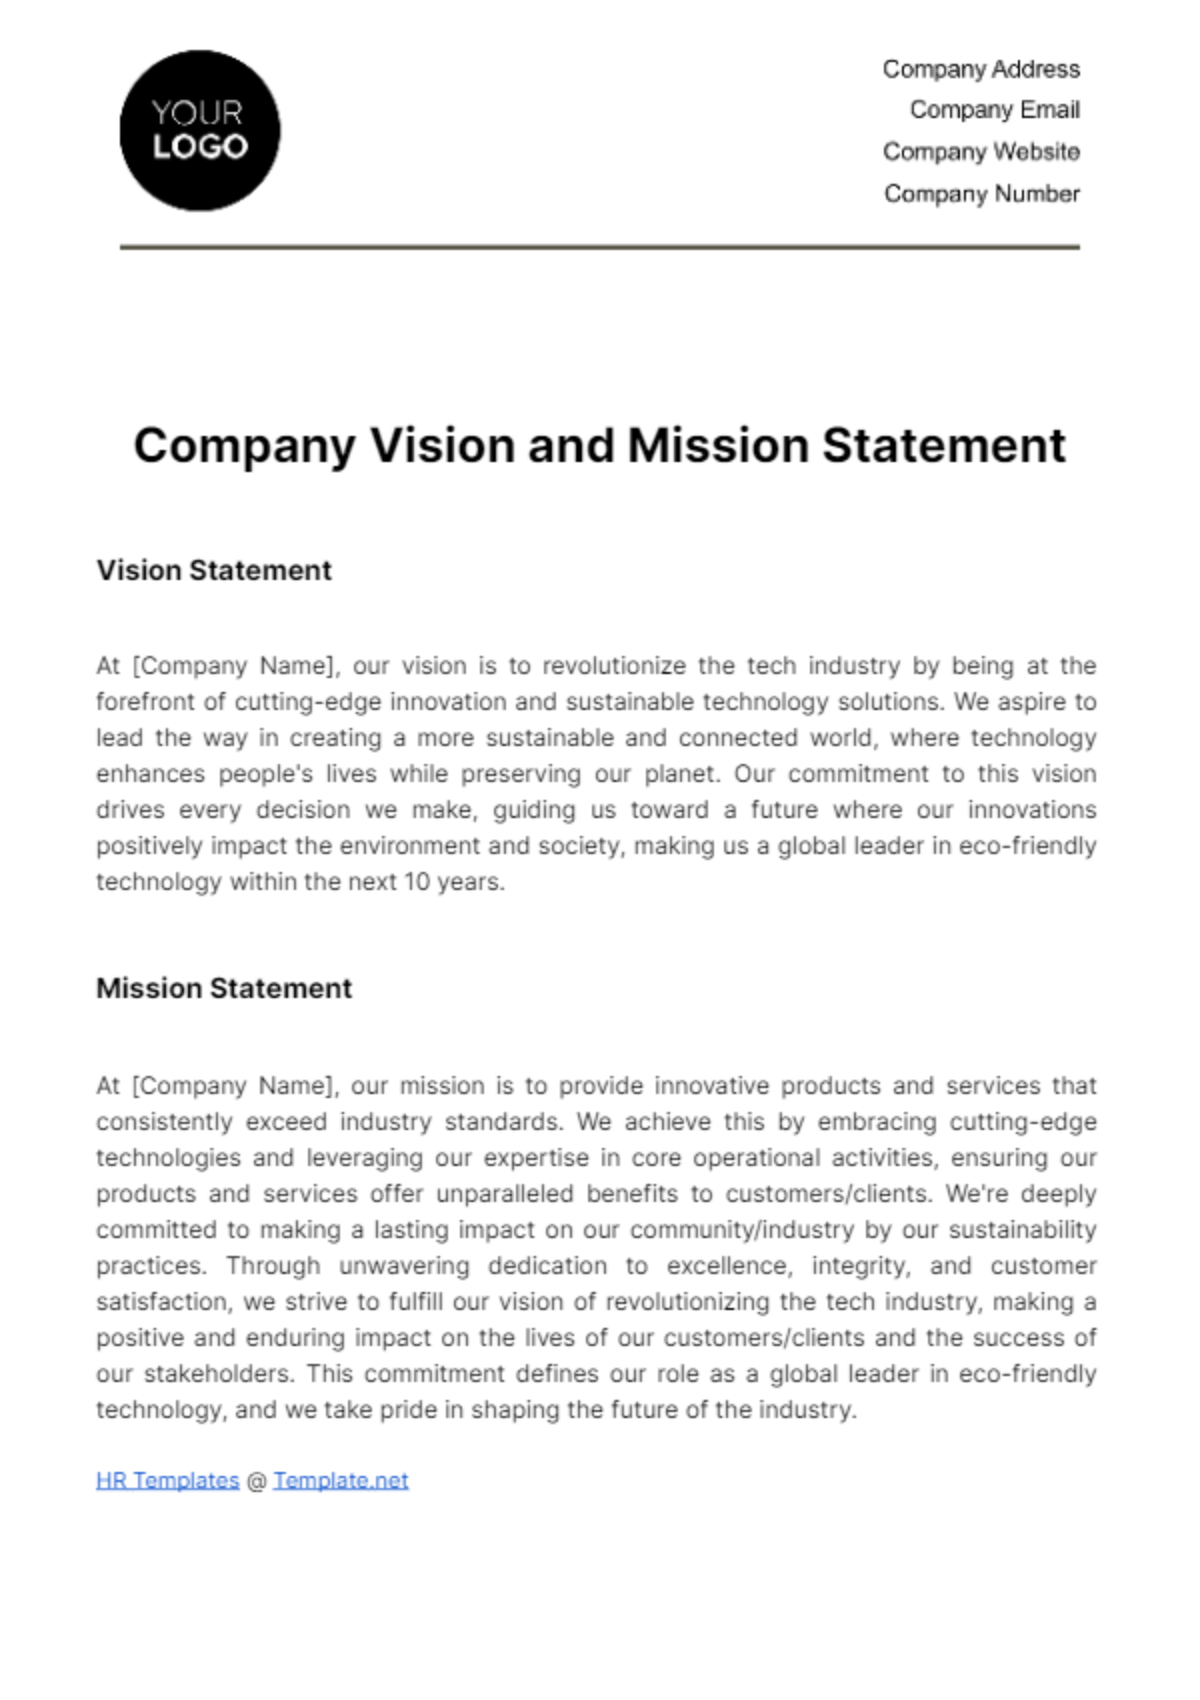 Free Company Vision and Mission Statement HR Template